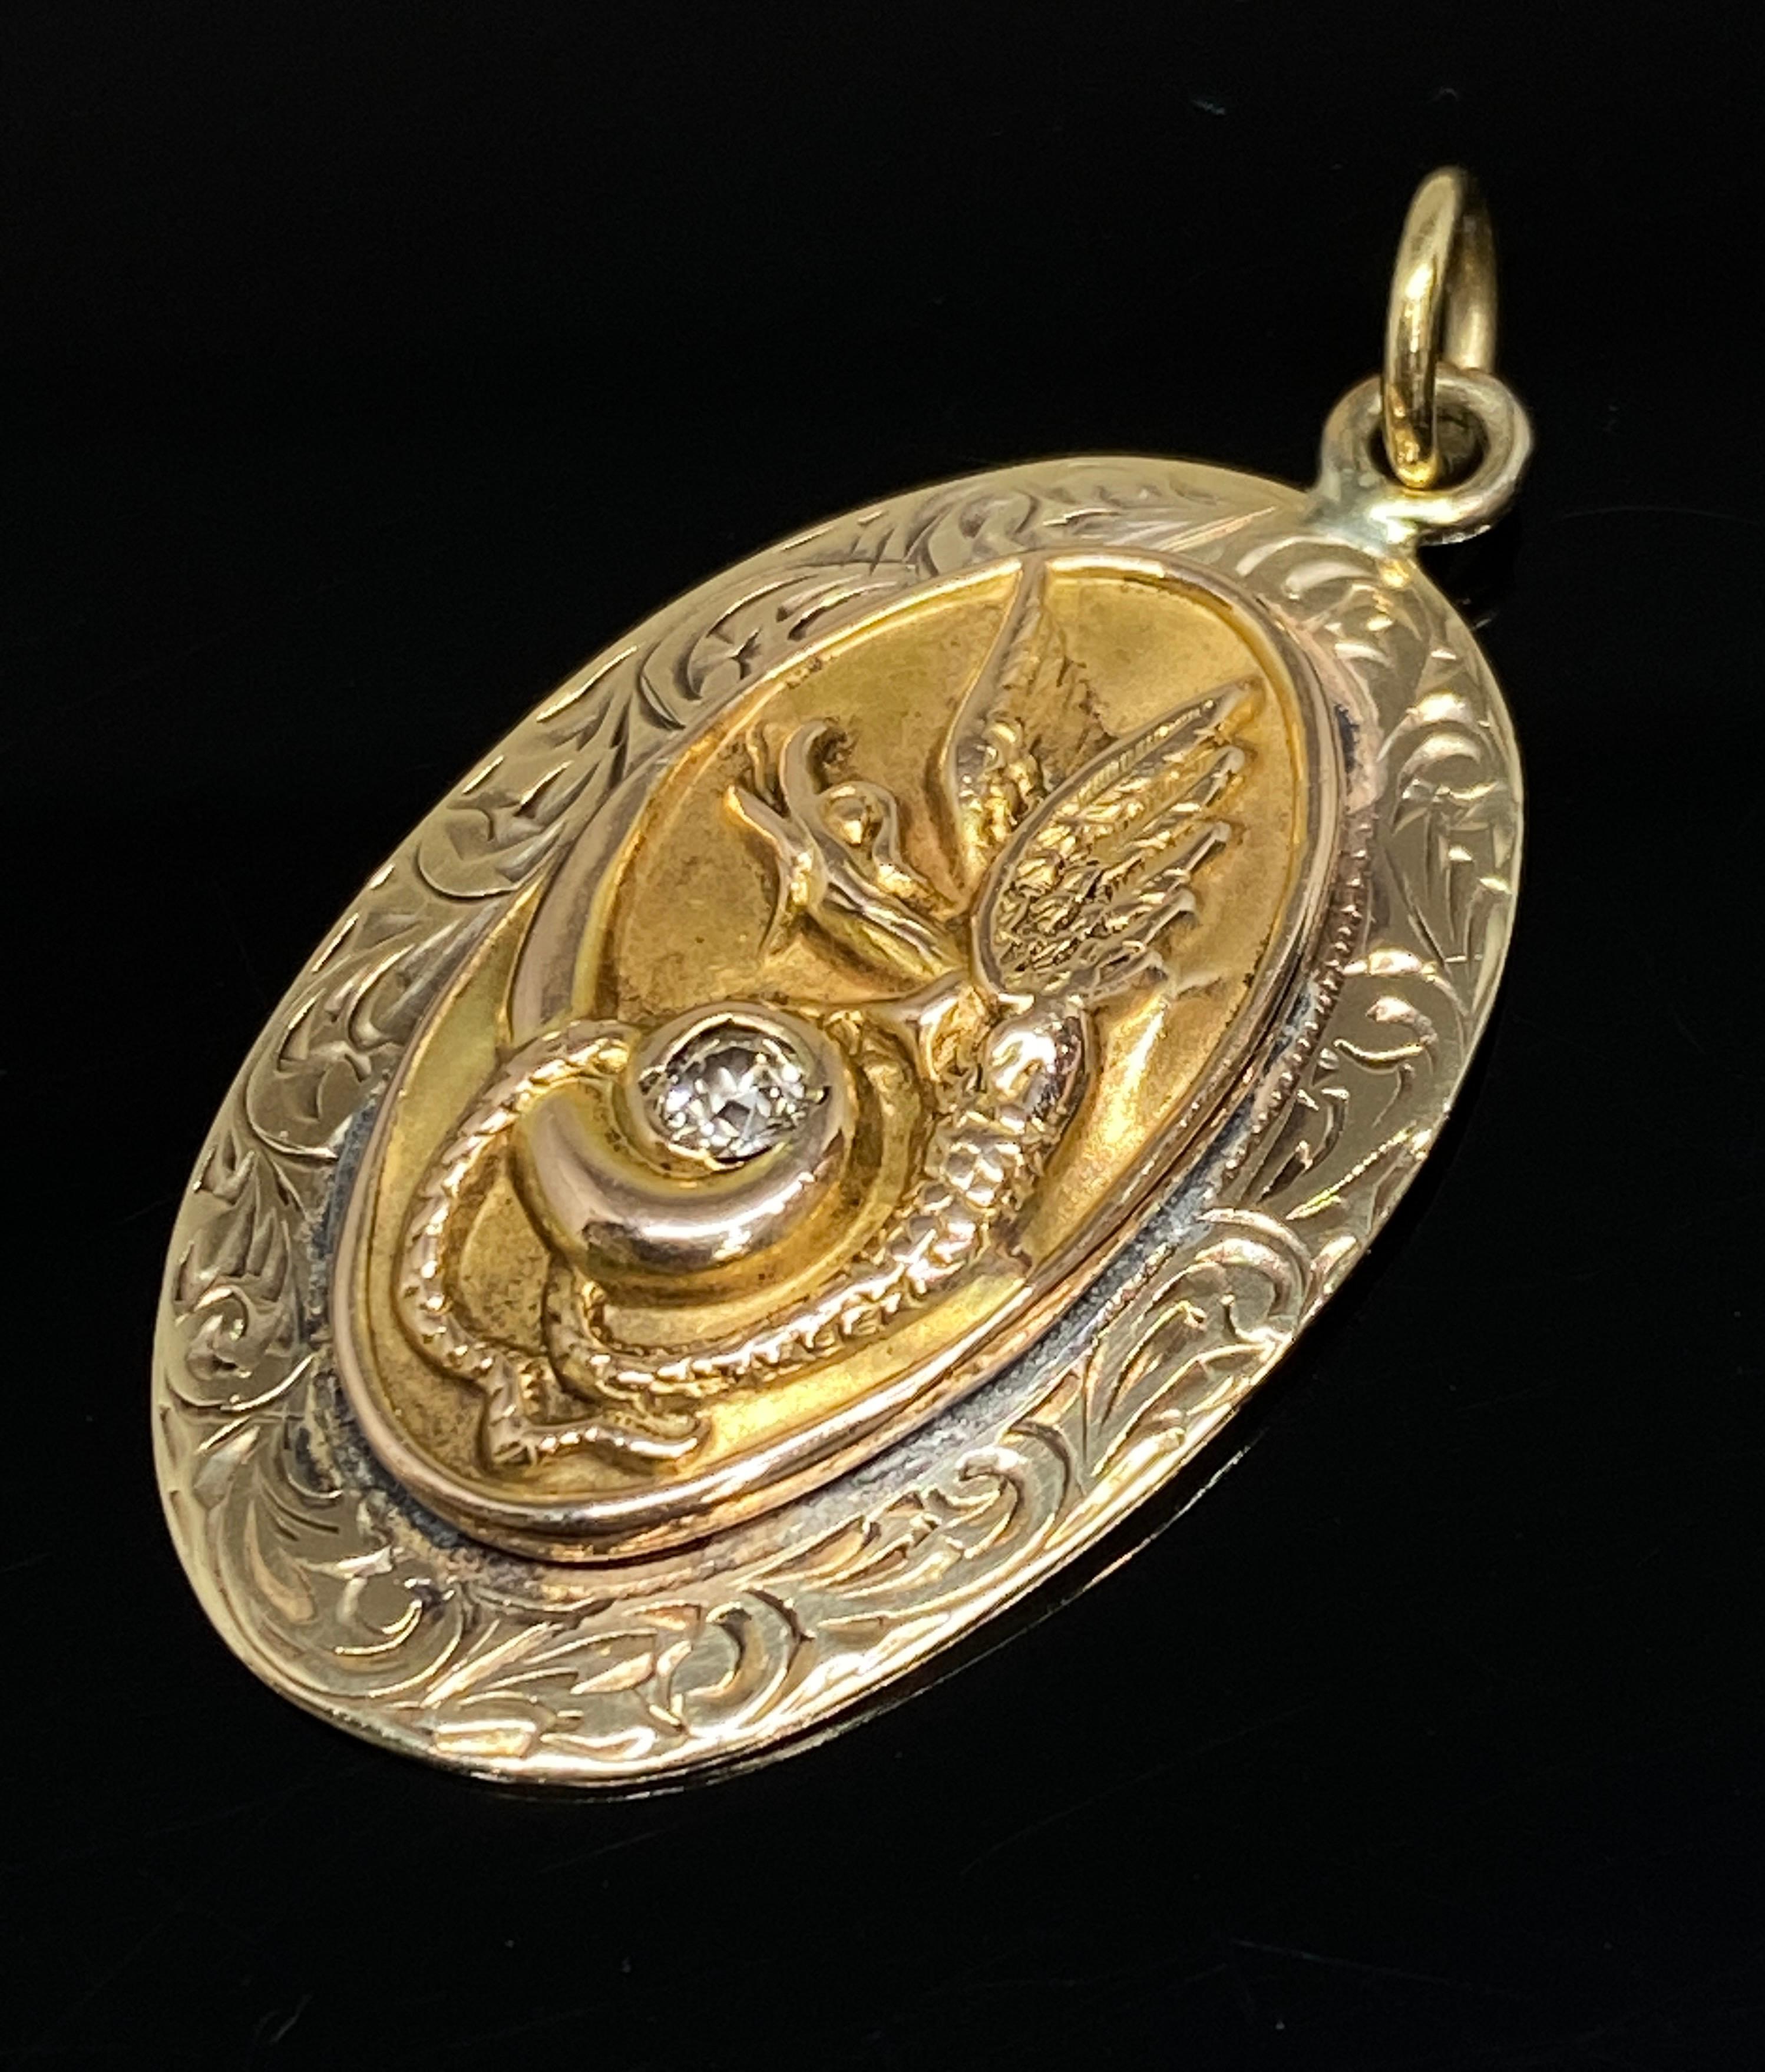 Up for your consideration is this fantastic rare Victorian gothic pendant featuring a stunning mythological Dragon crafted in lustrous 14k yellow gold.
This beautiful pendant was created in the late 19th century, circa 1890's, designed with late